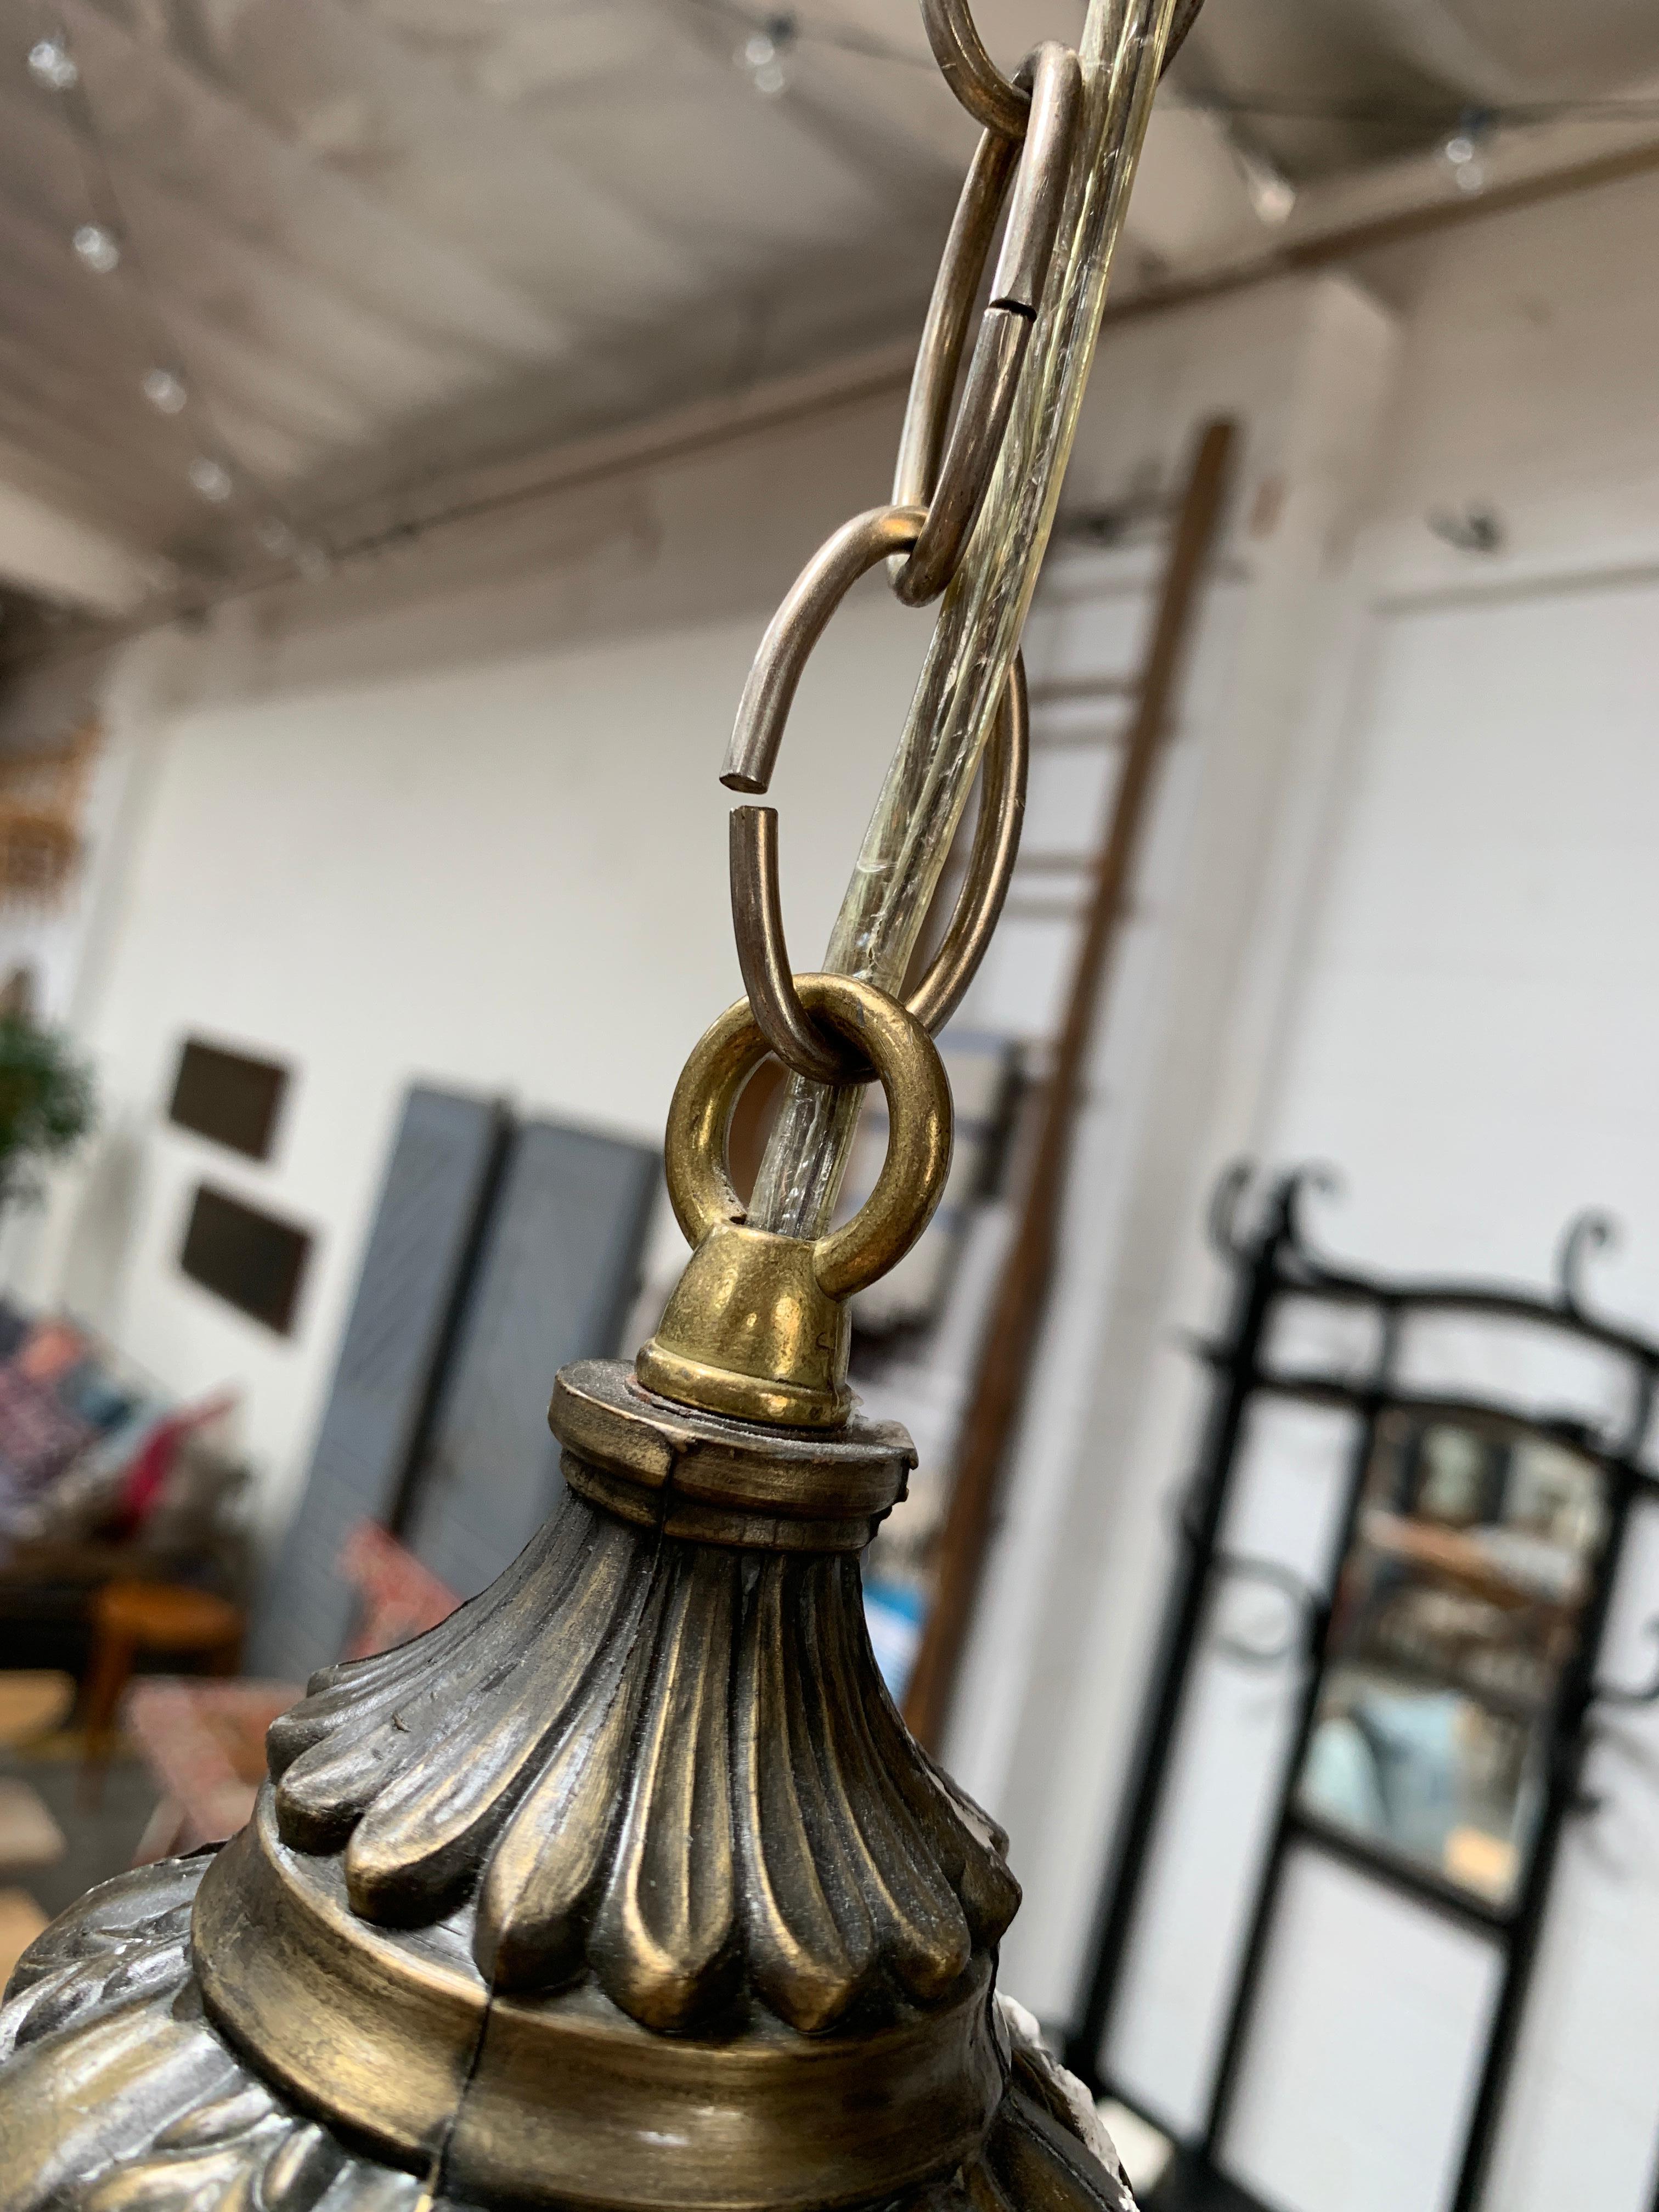 Vintage European Pendant with textured glass that creates a unique look when lit. Brass fixture is original, unscrews to allow for cleaning and bulb removal. Takes standard bulbs.